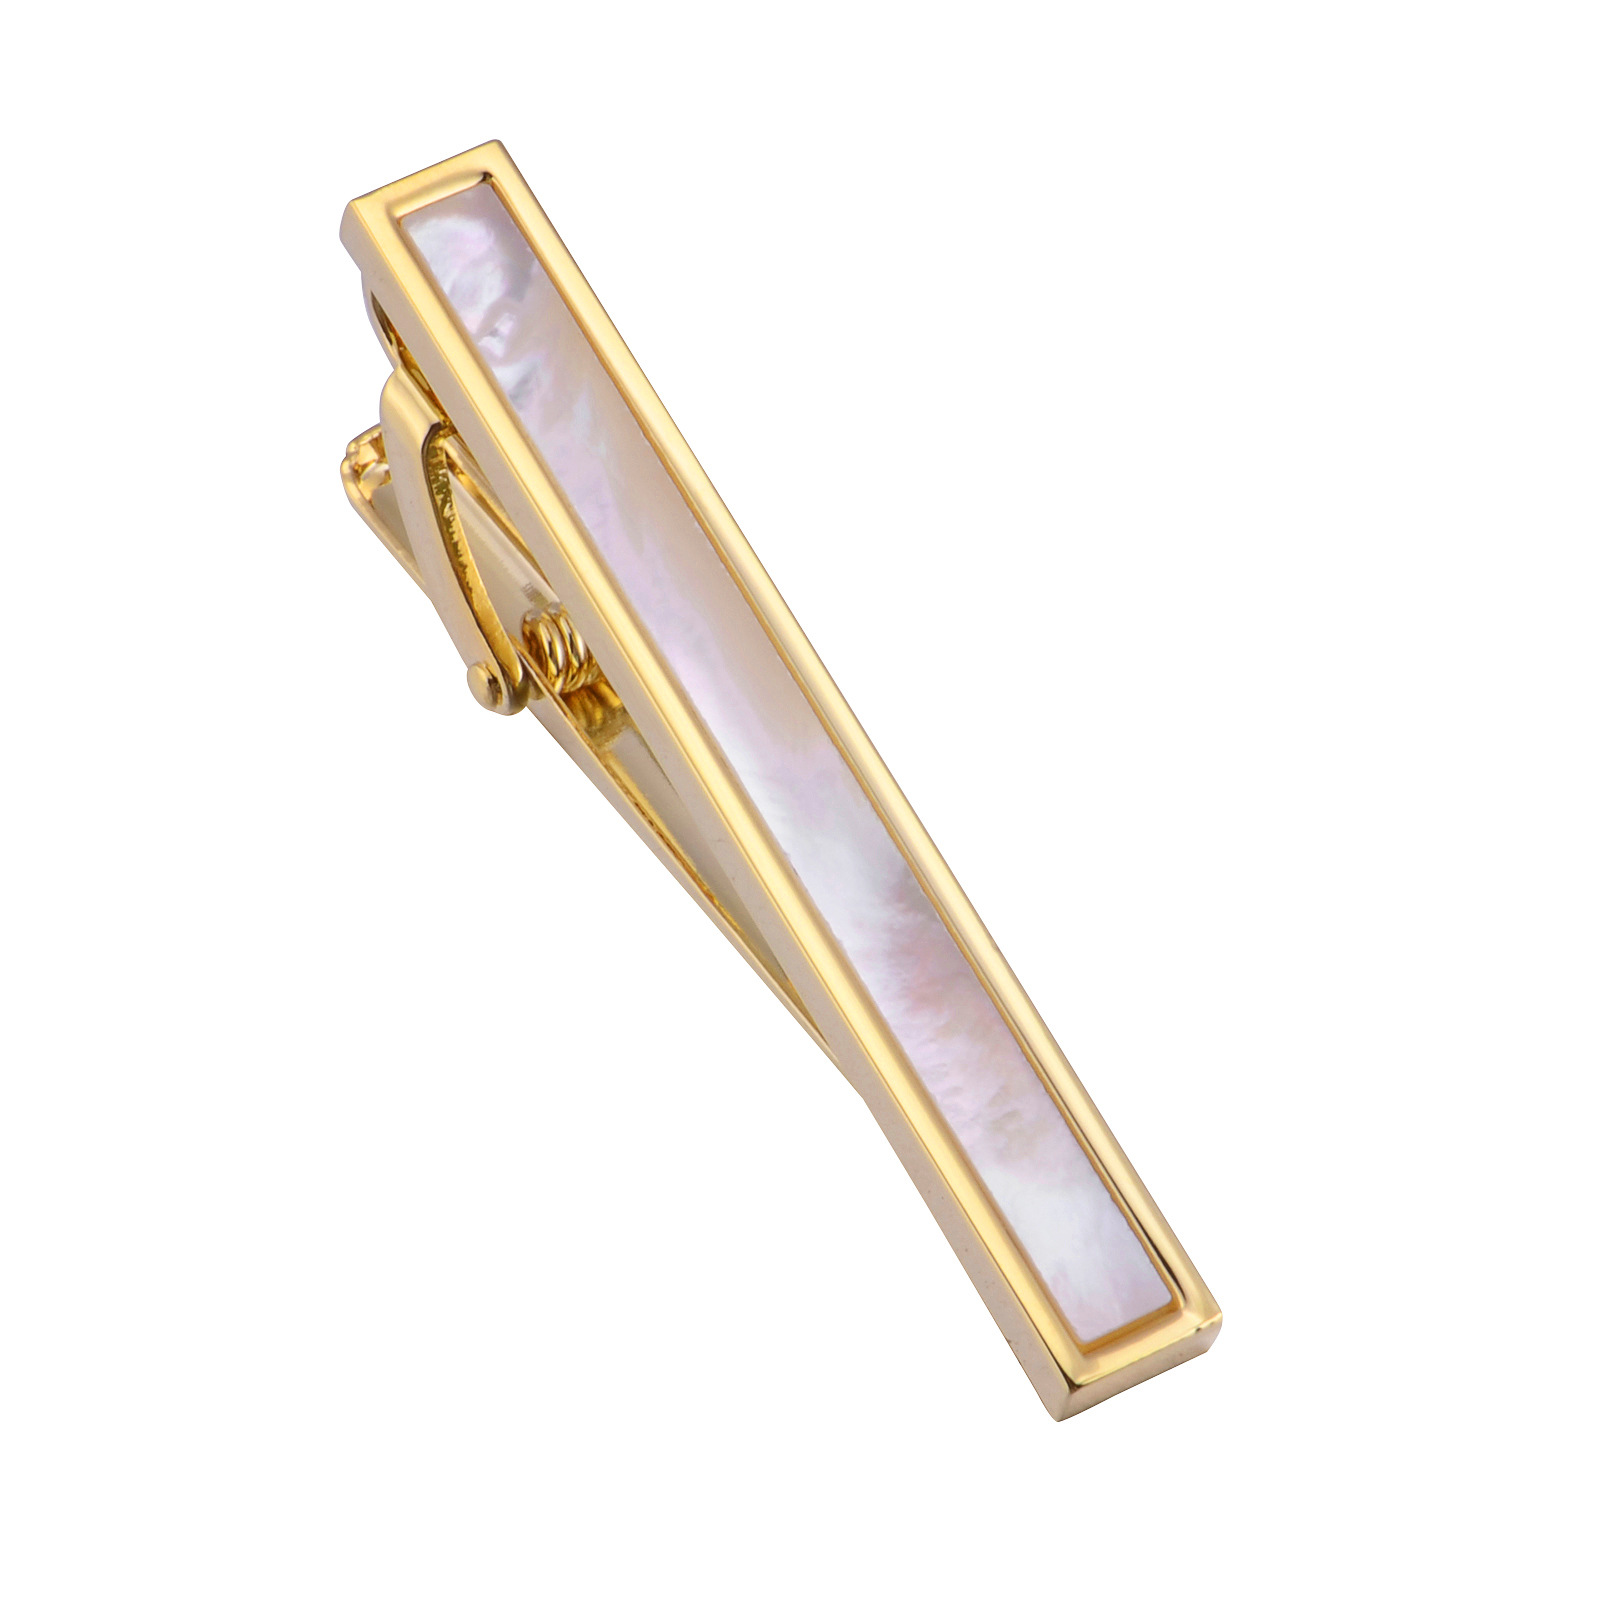 1:K Gold Pearl Shell tie clip